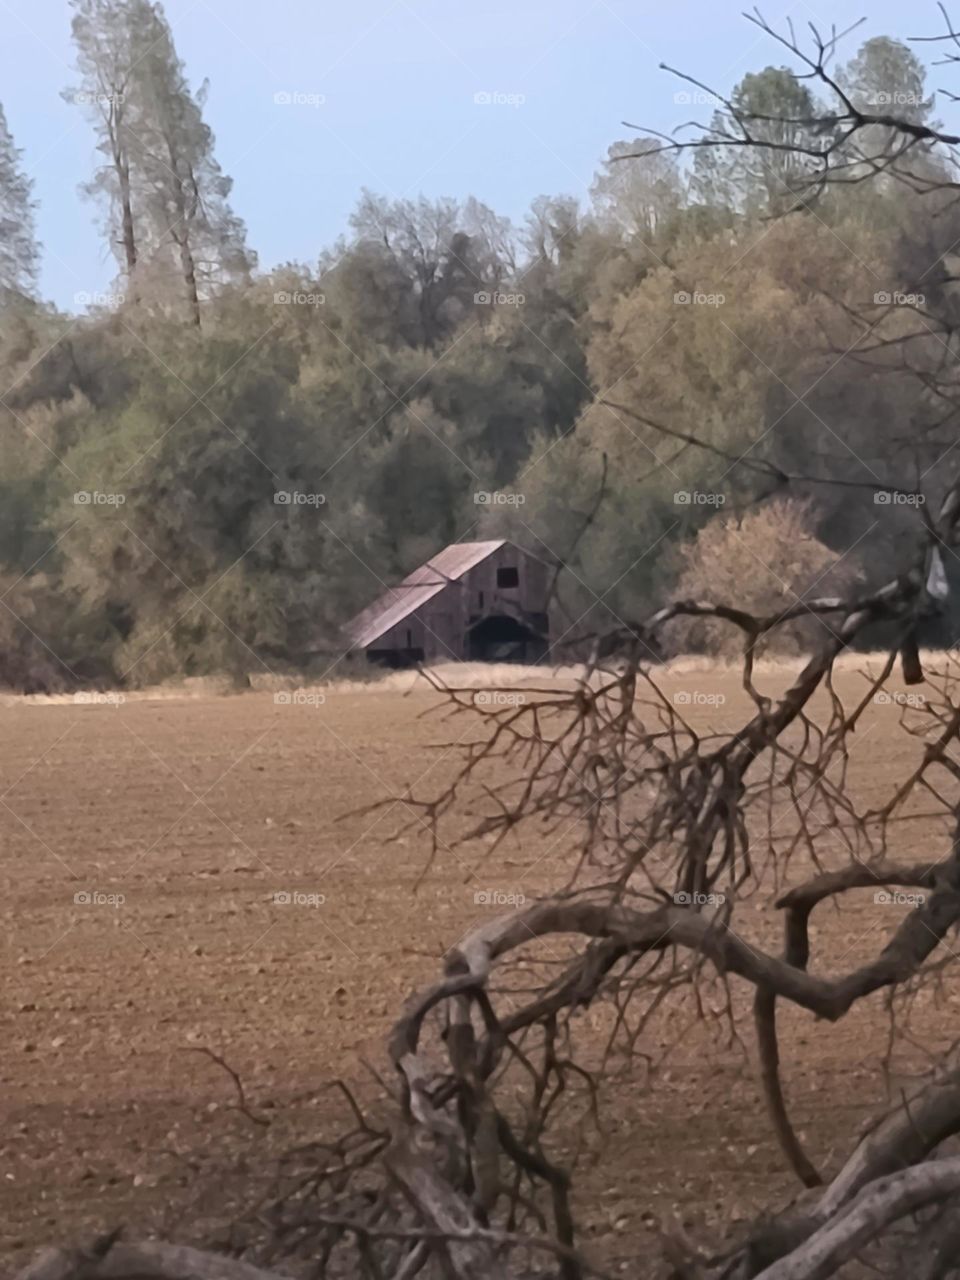 I happen to know that a man shot himself, in that barn.  No one has used it, since.  It is falling into decay, like the mind of its erstwhile owner.  No one checks on it.  No one would dare.  Madness lives inside.